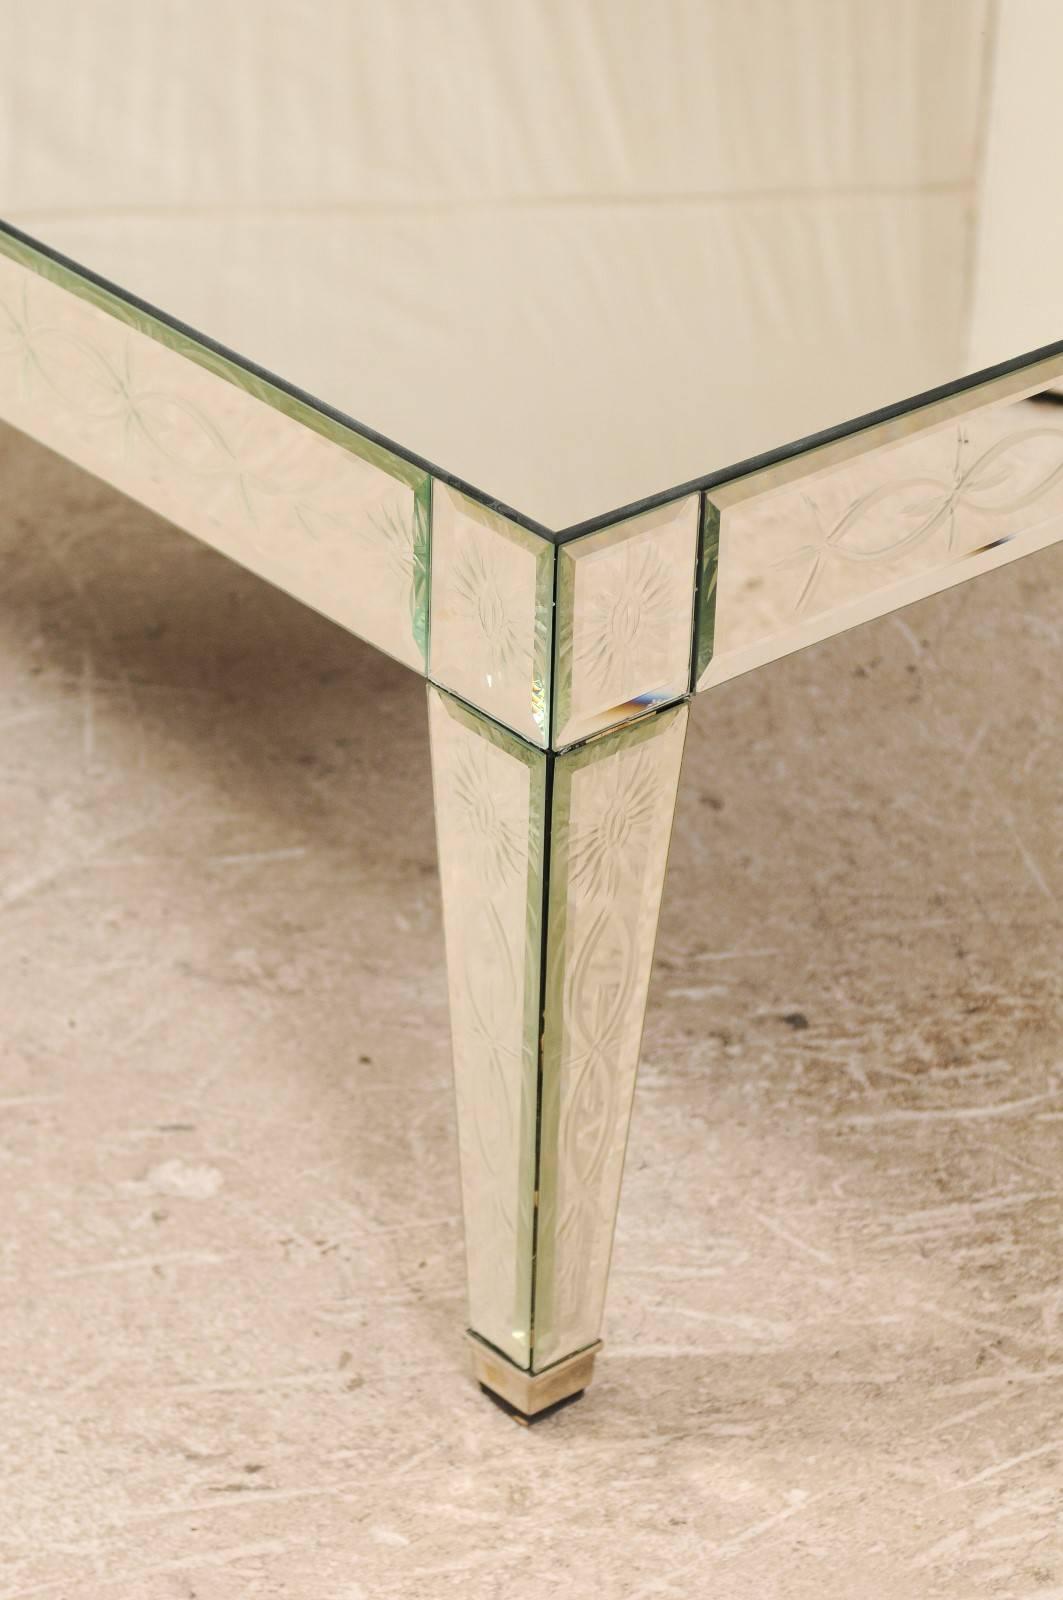 20th Century A Venetian-Style Vintage Mirrored Coffee Table, Artisan Hand-Silvered